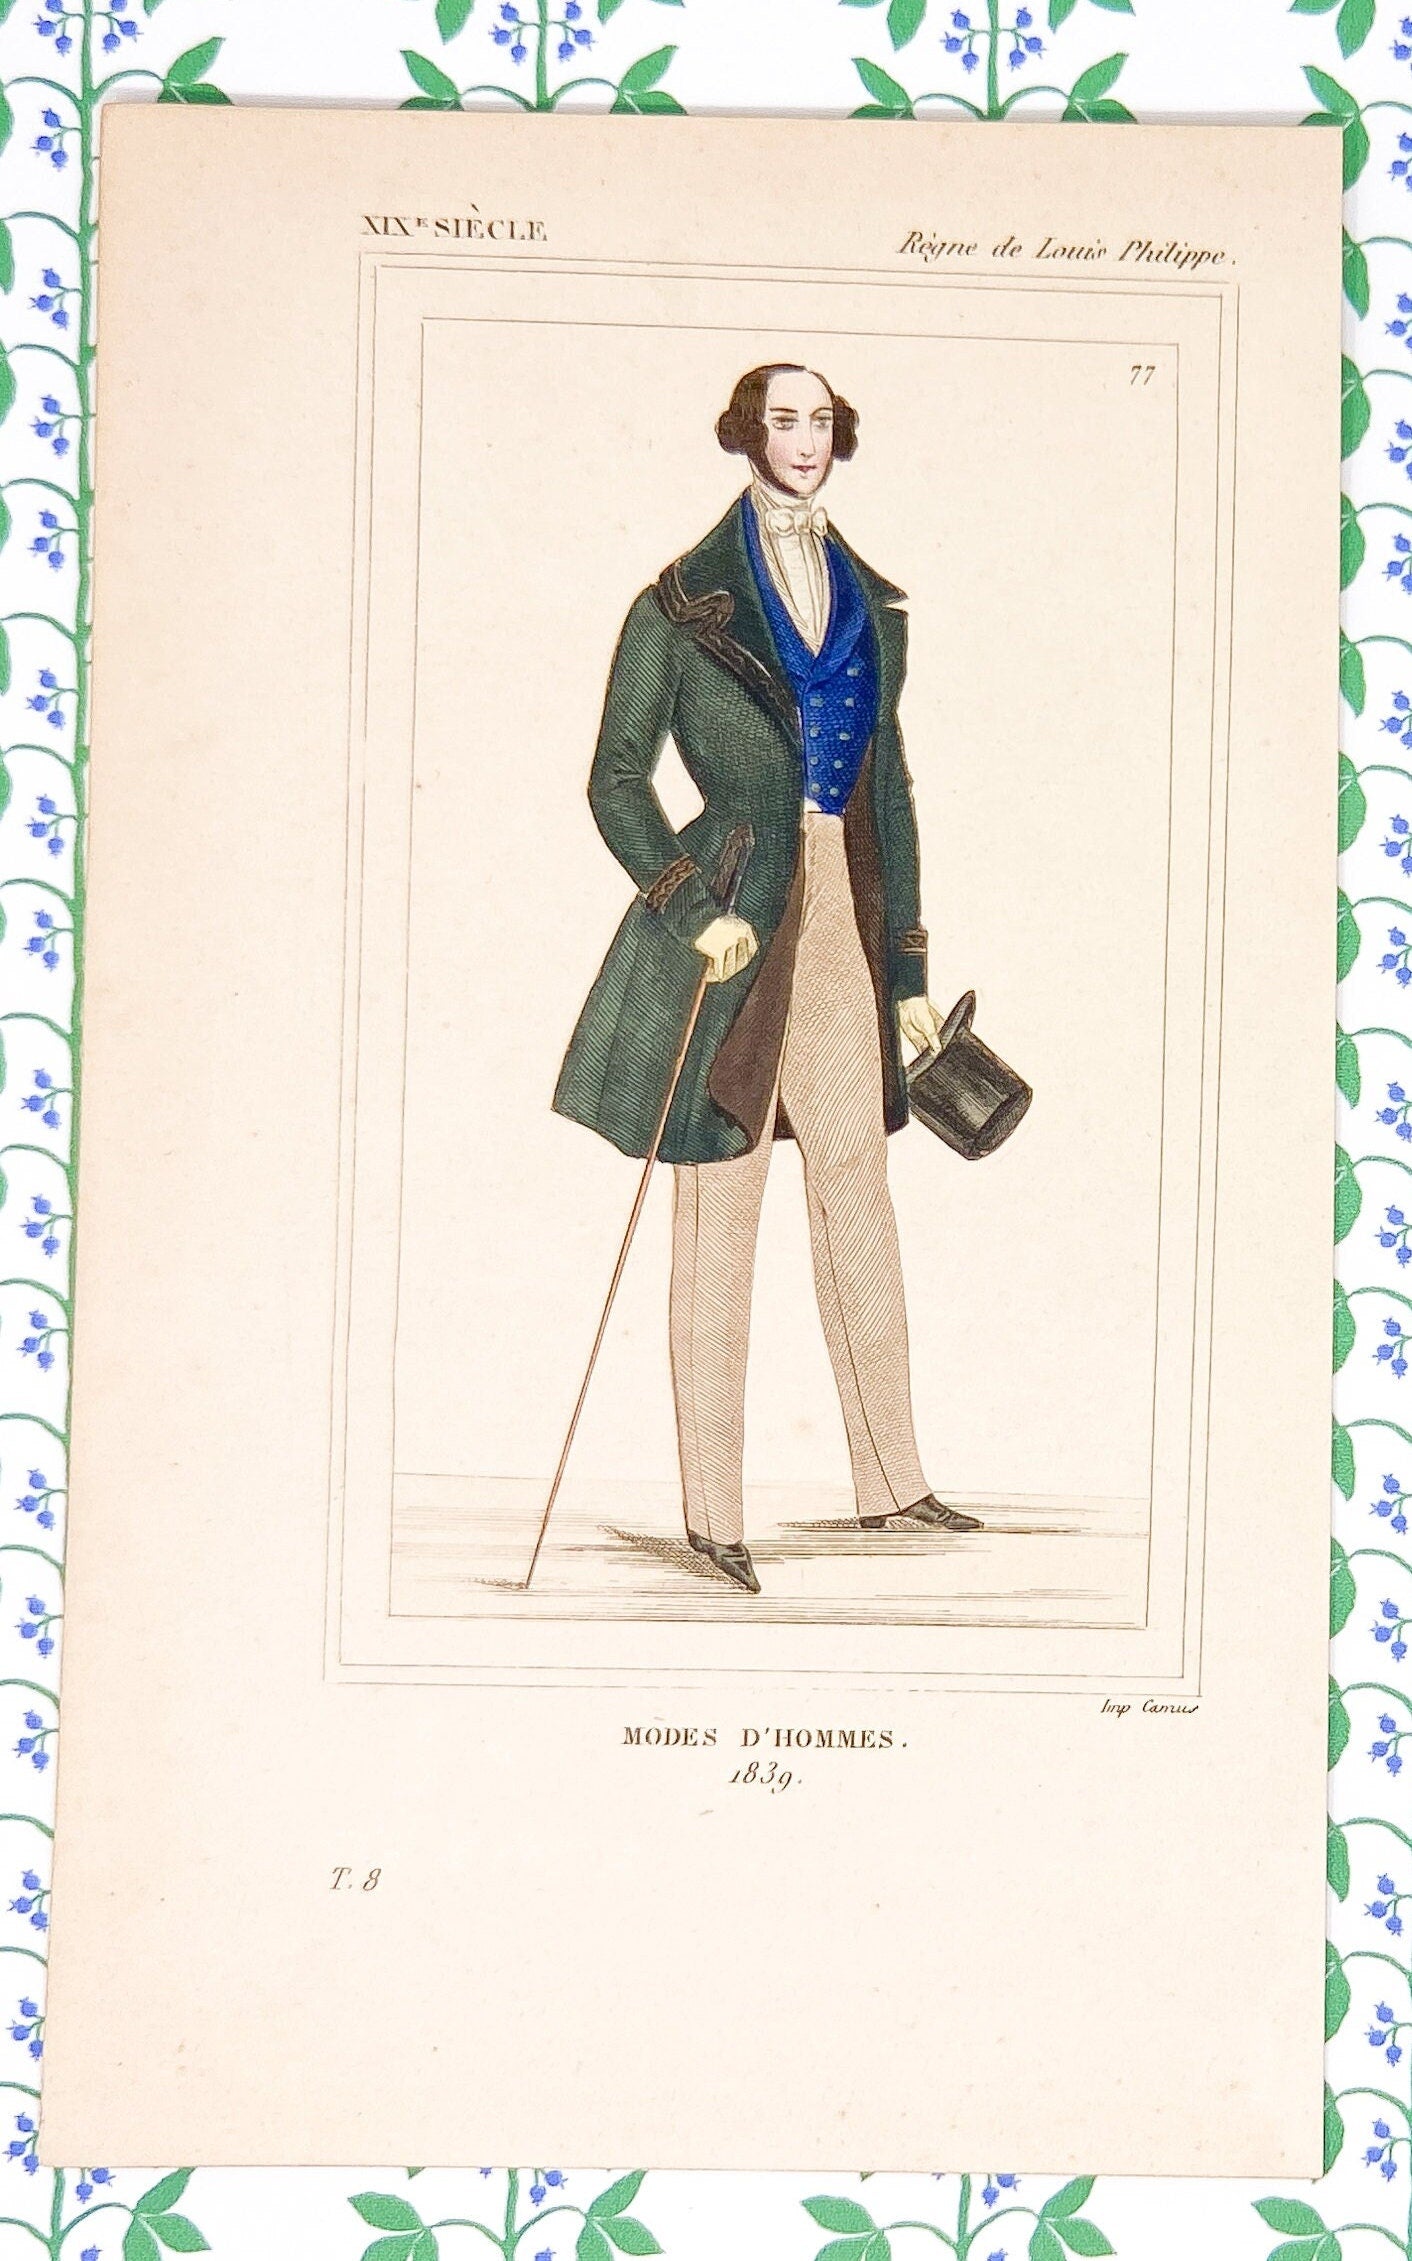 Antique French Fashion Plates from "Historical Costumes of France"